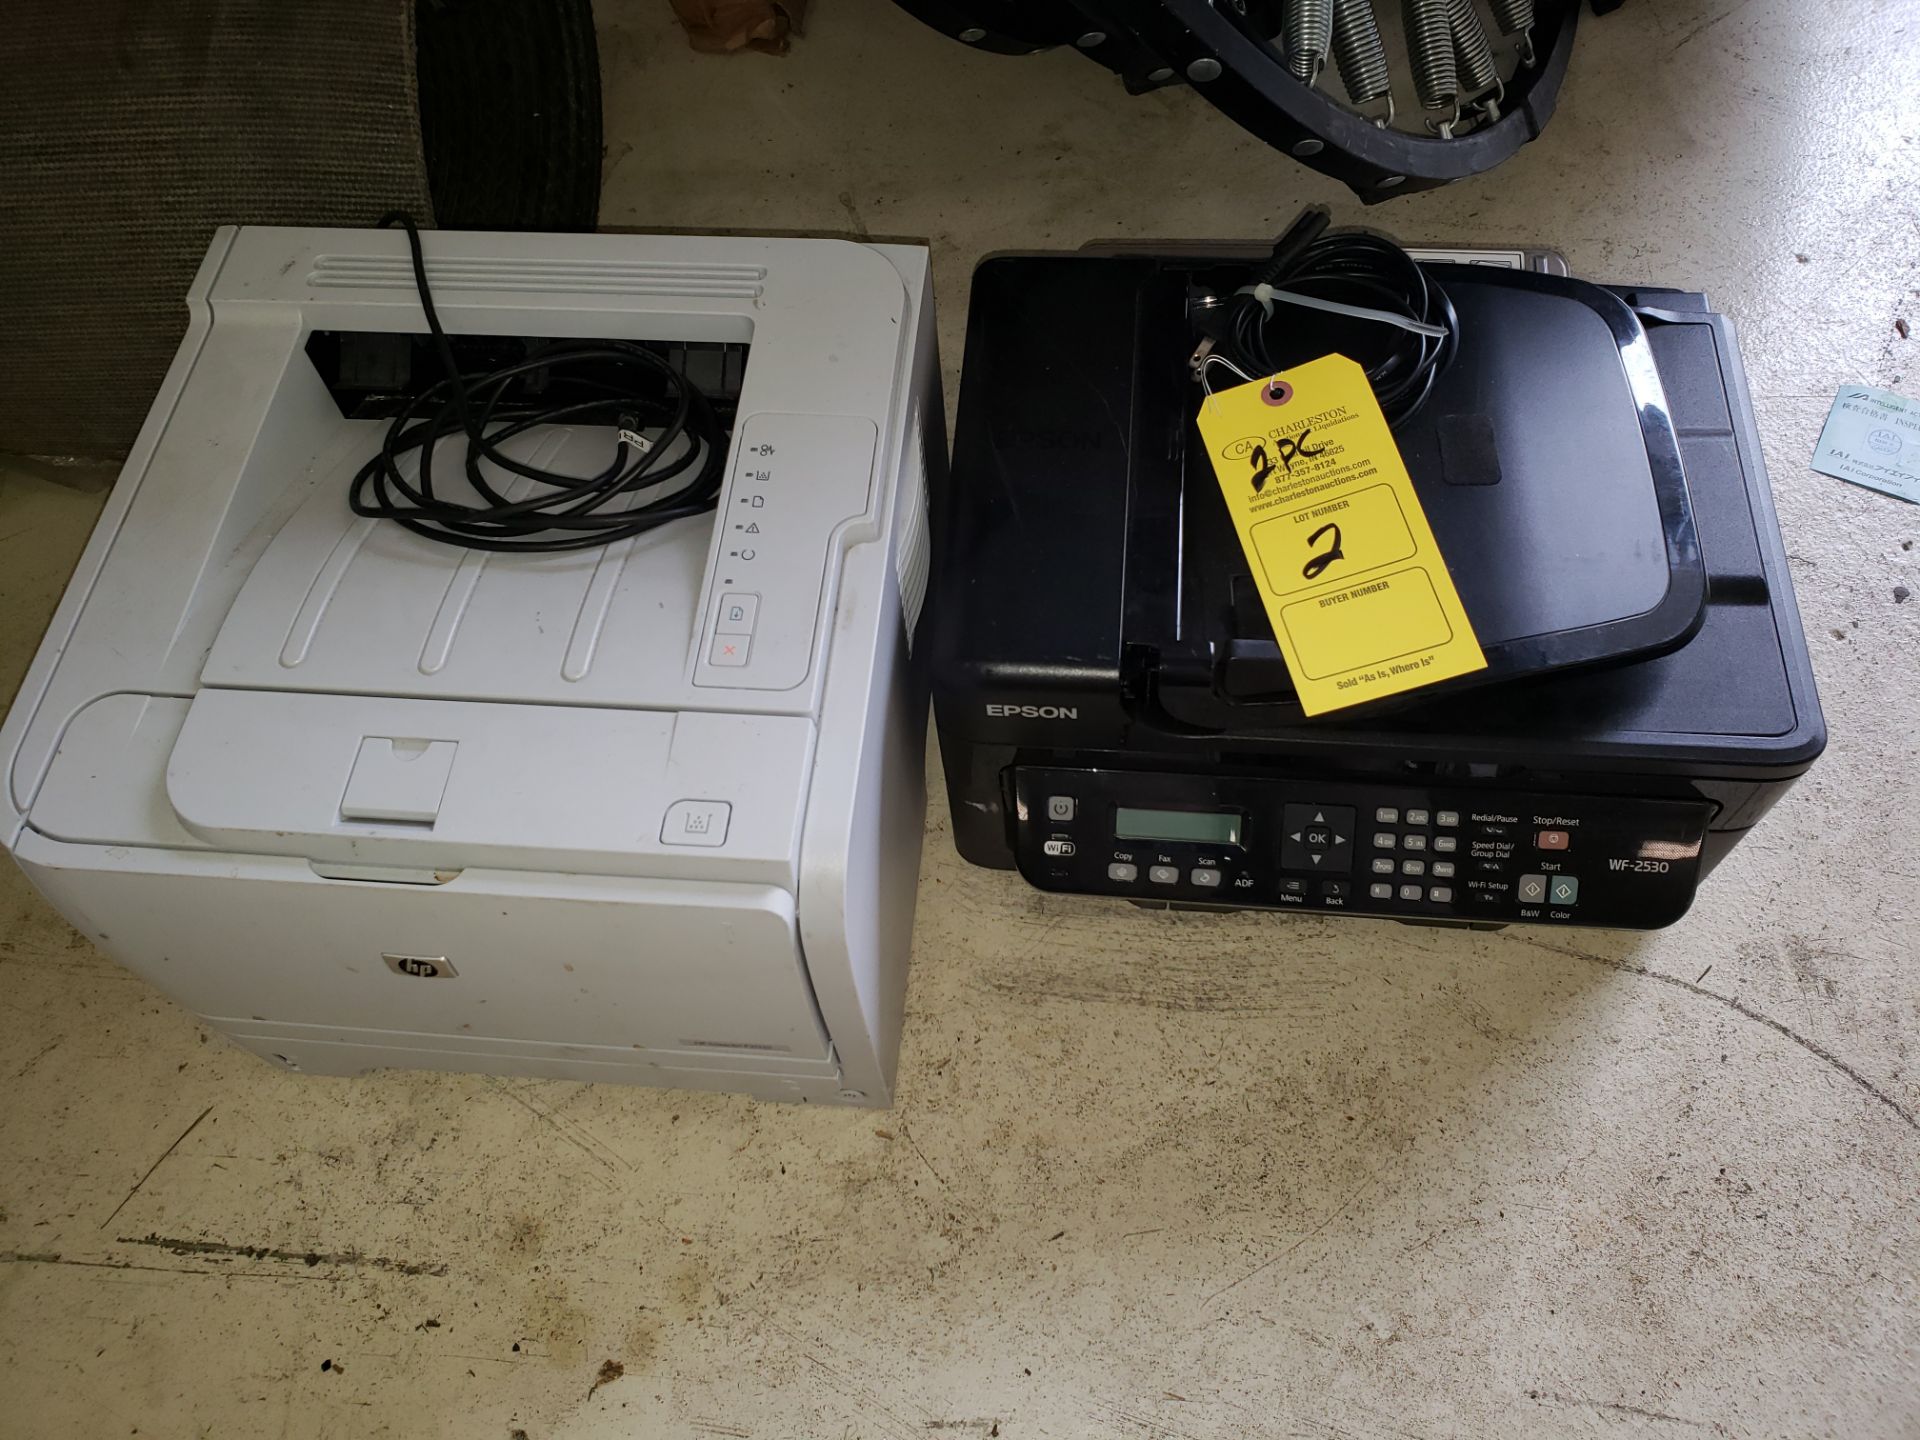 (1) EPSON PRINTER/FAX/SCANNER MODEL-WF-2530 (1) HP LASER JET P2035 PRINTER (LOCATED AT 432 COUNCIL